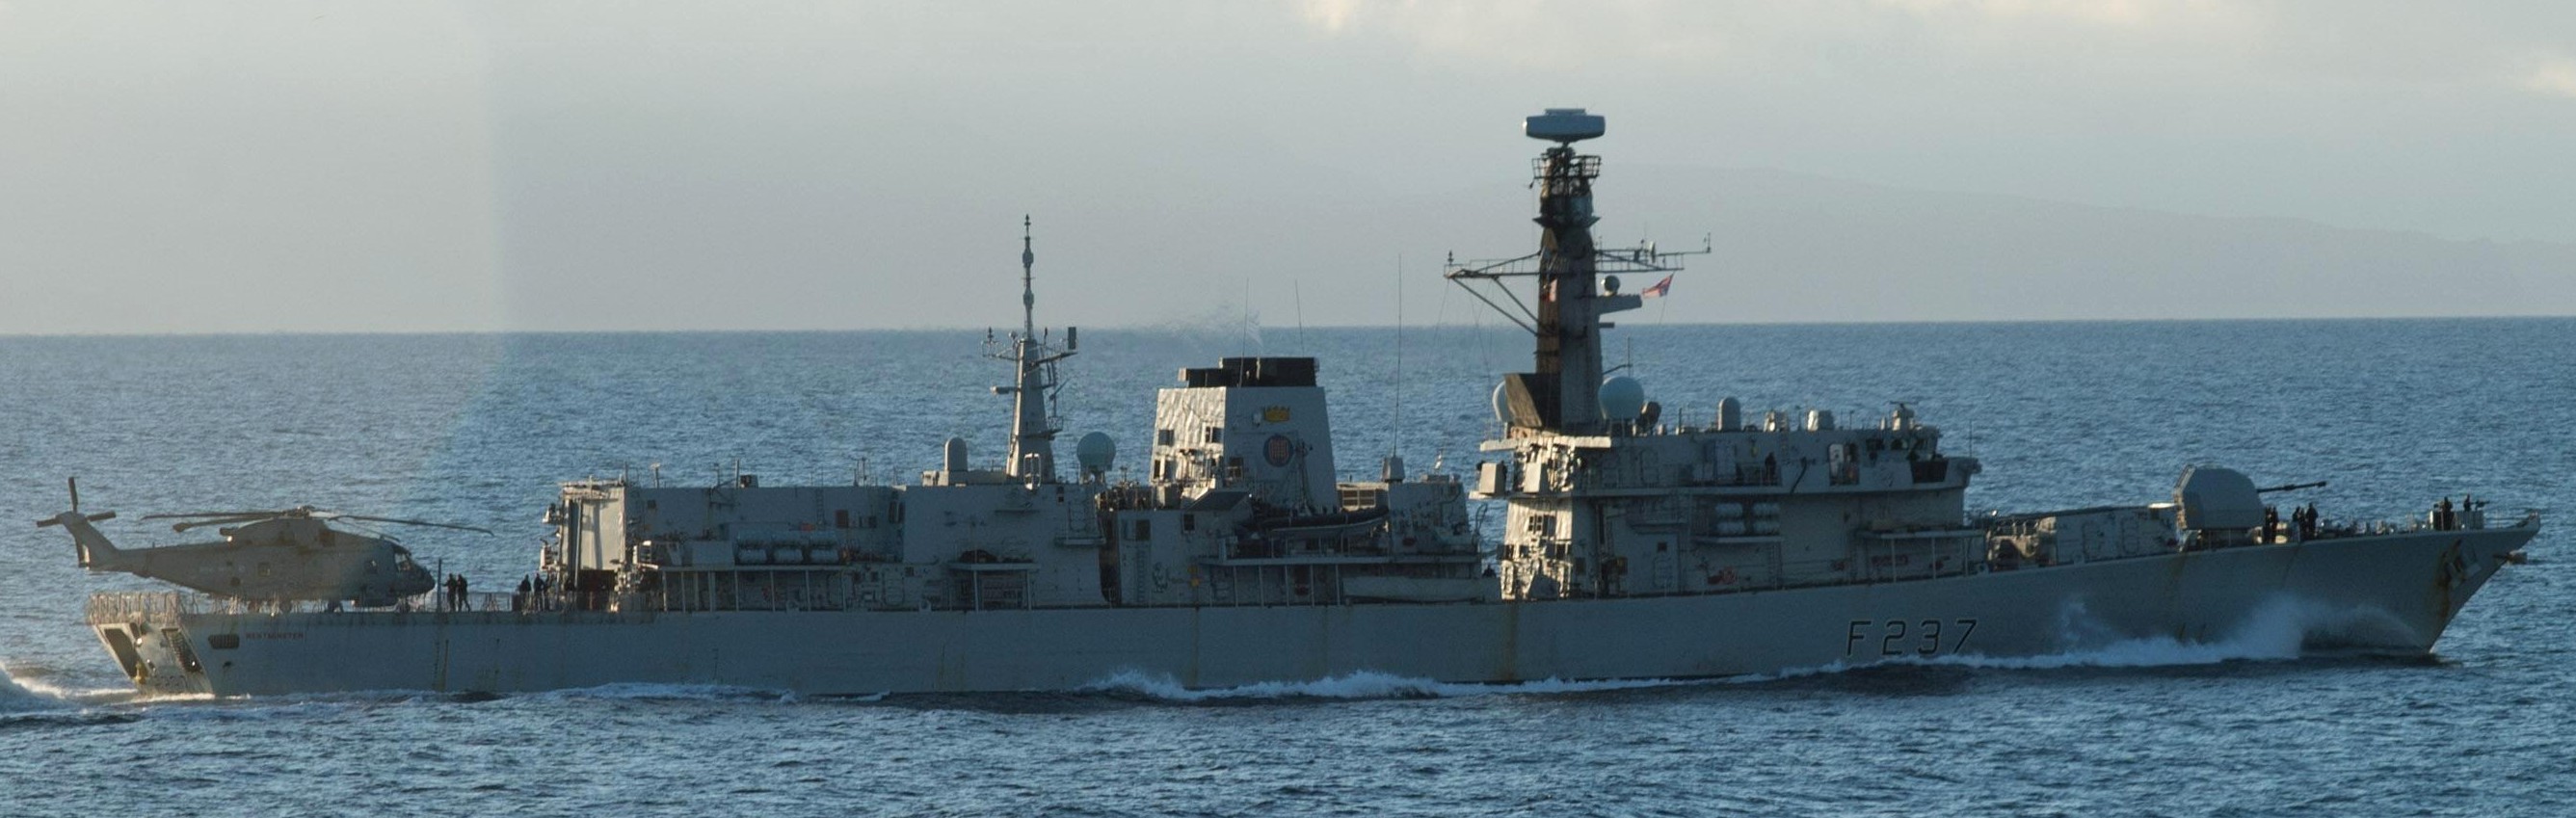 f-237 hms westminster type 23 duke class guided missile frigate ffg royal navy 26 merlin helicopter